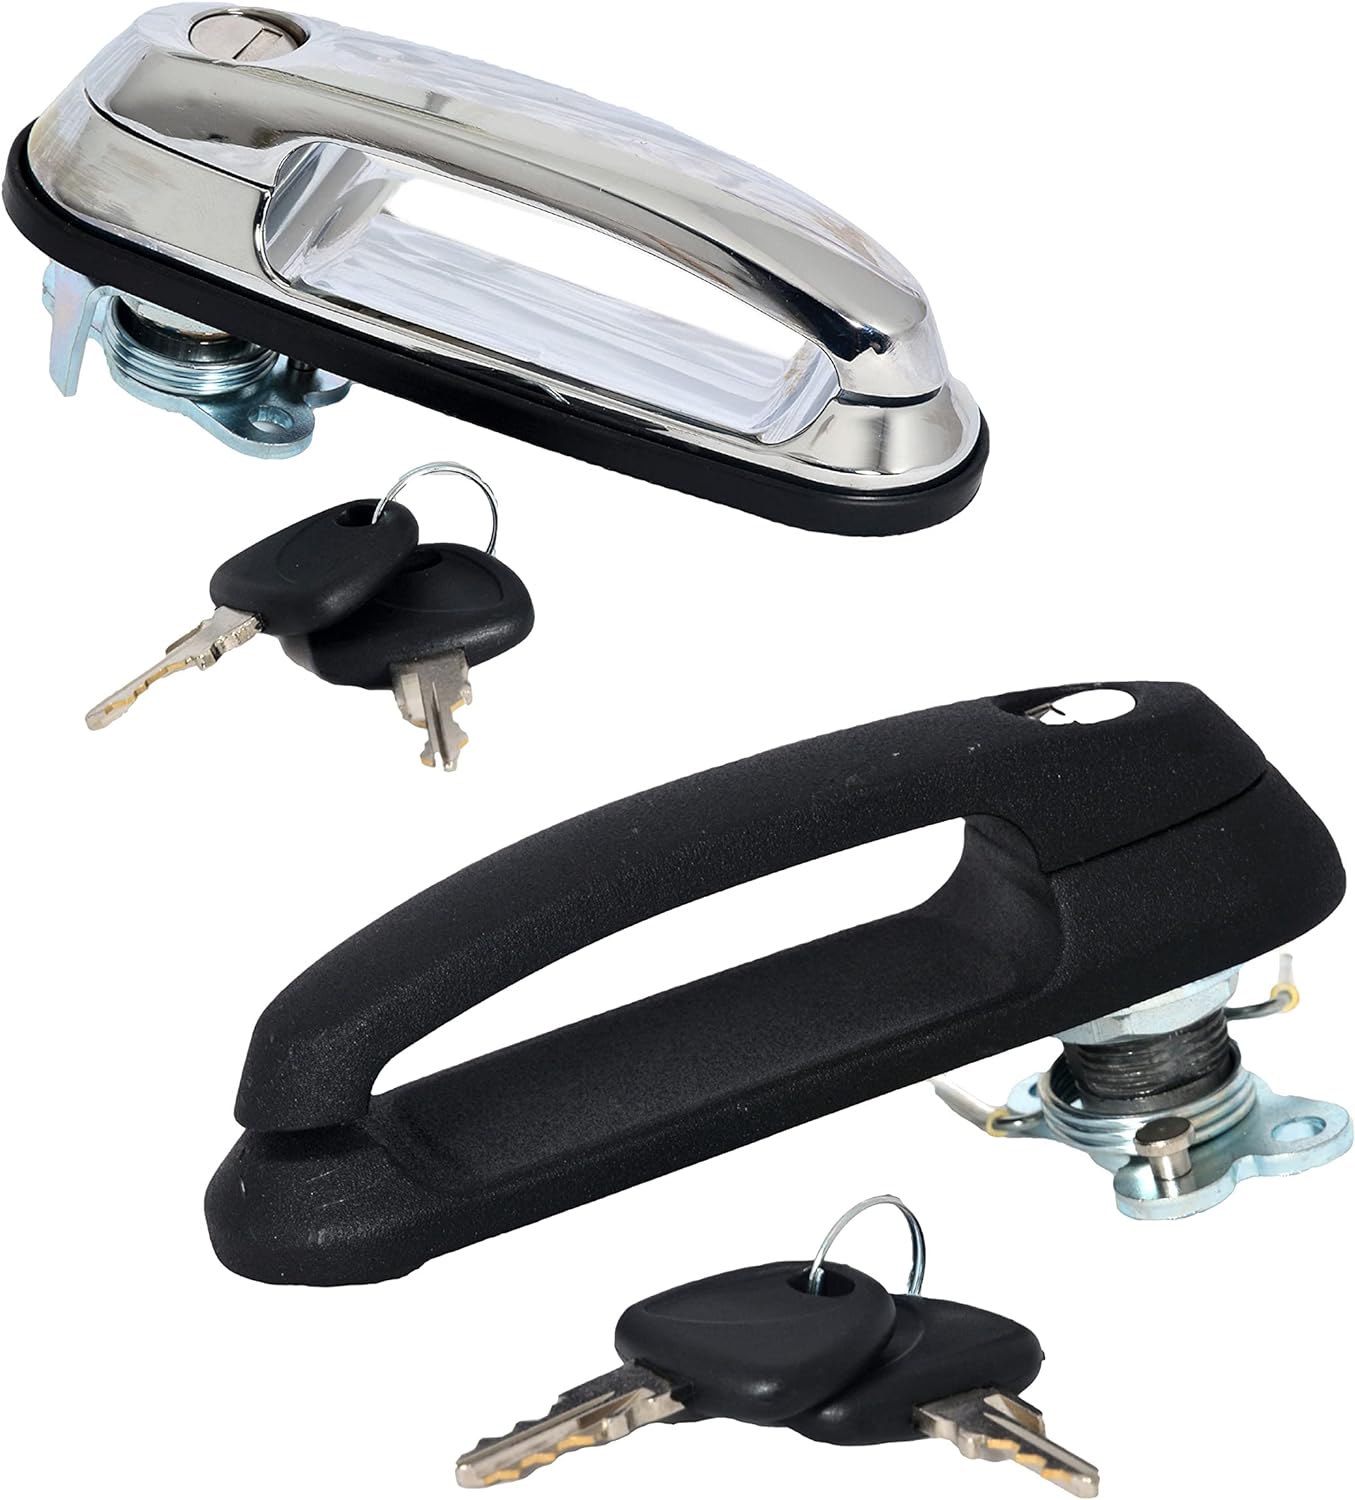 ROXFORM Stainless Steel Hardtop Canopy Tailgate Locking Handle - Scratch Proof and Glossy Type - Rear Door Lock Combinations - Fit for All European Trucks - Silver